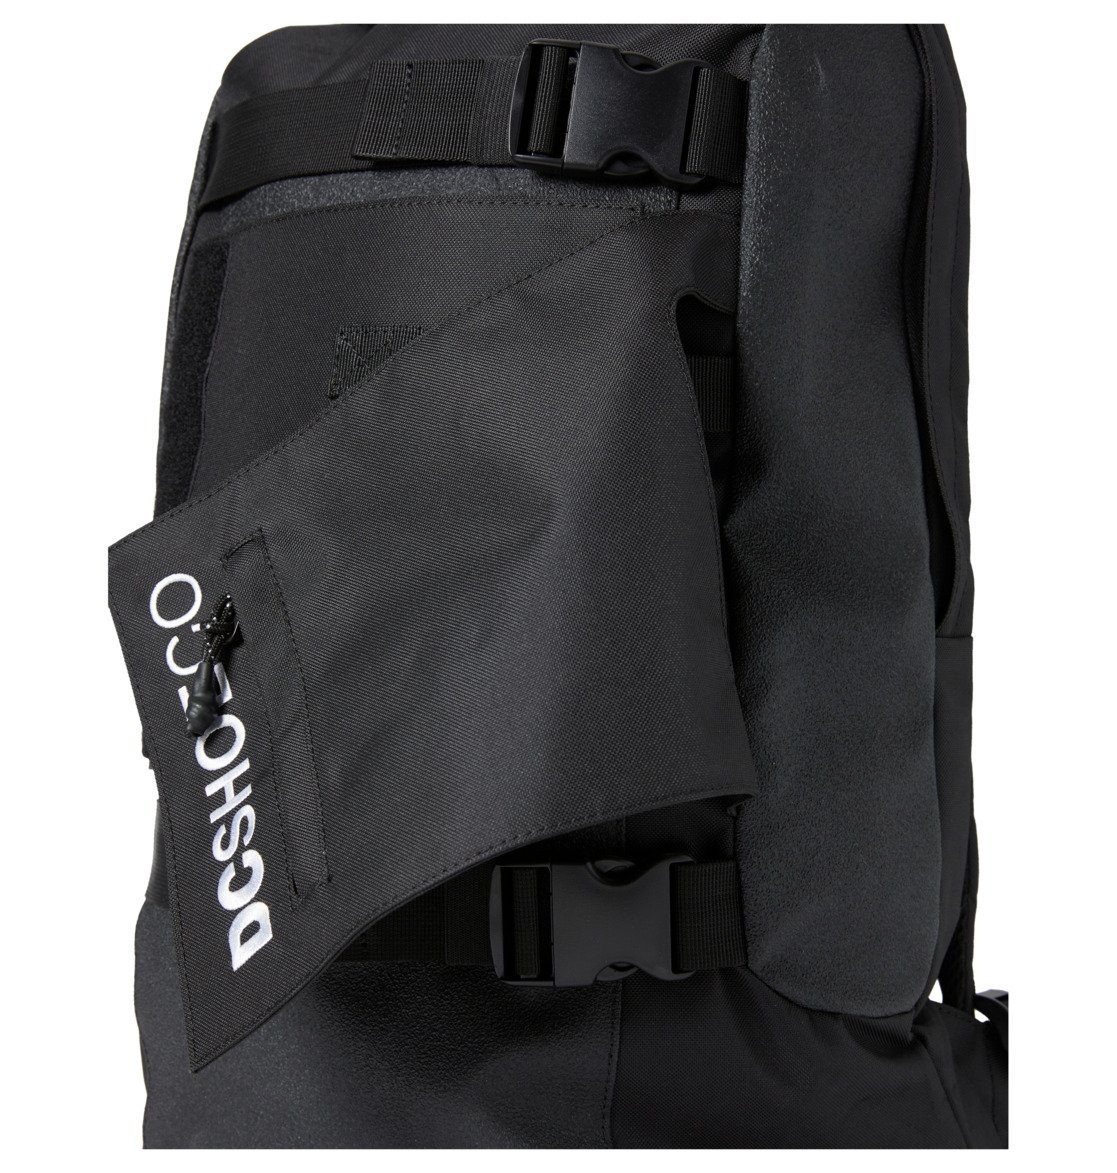 27L Shoes City All Tagesrucksack DC